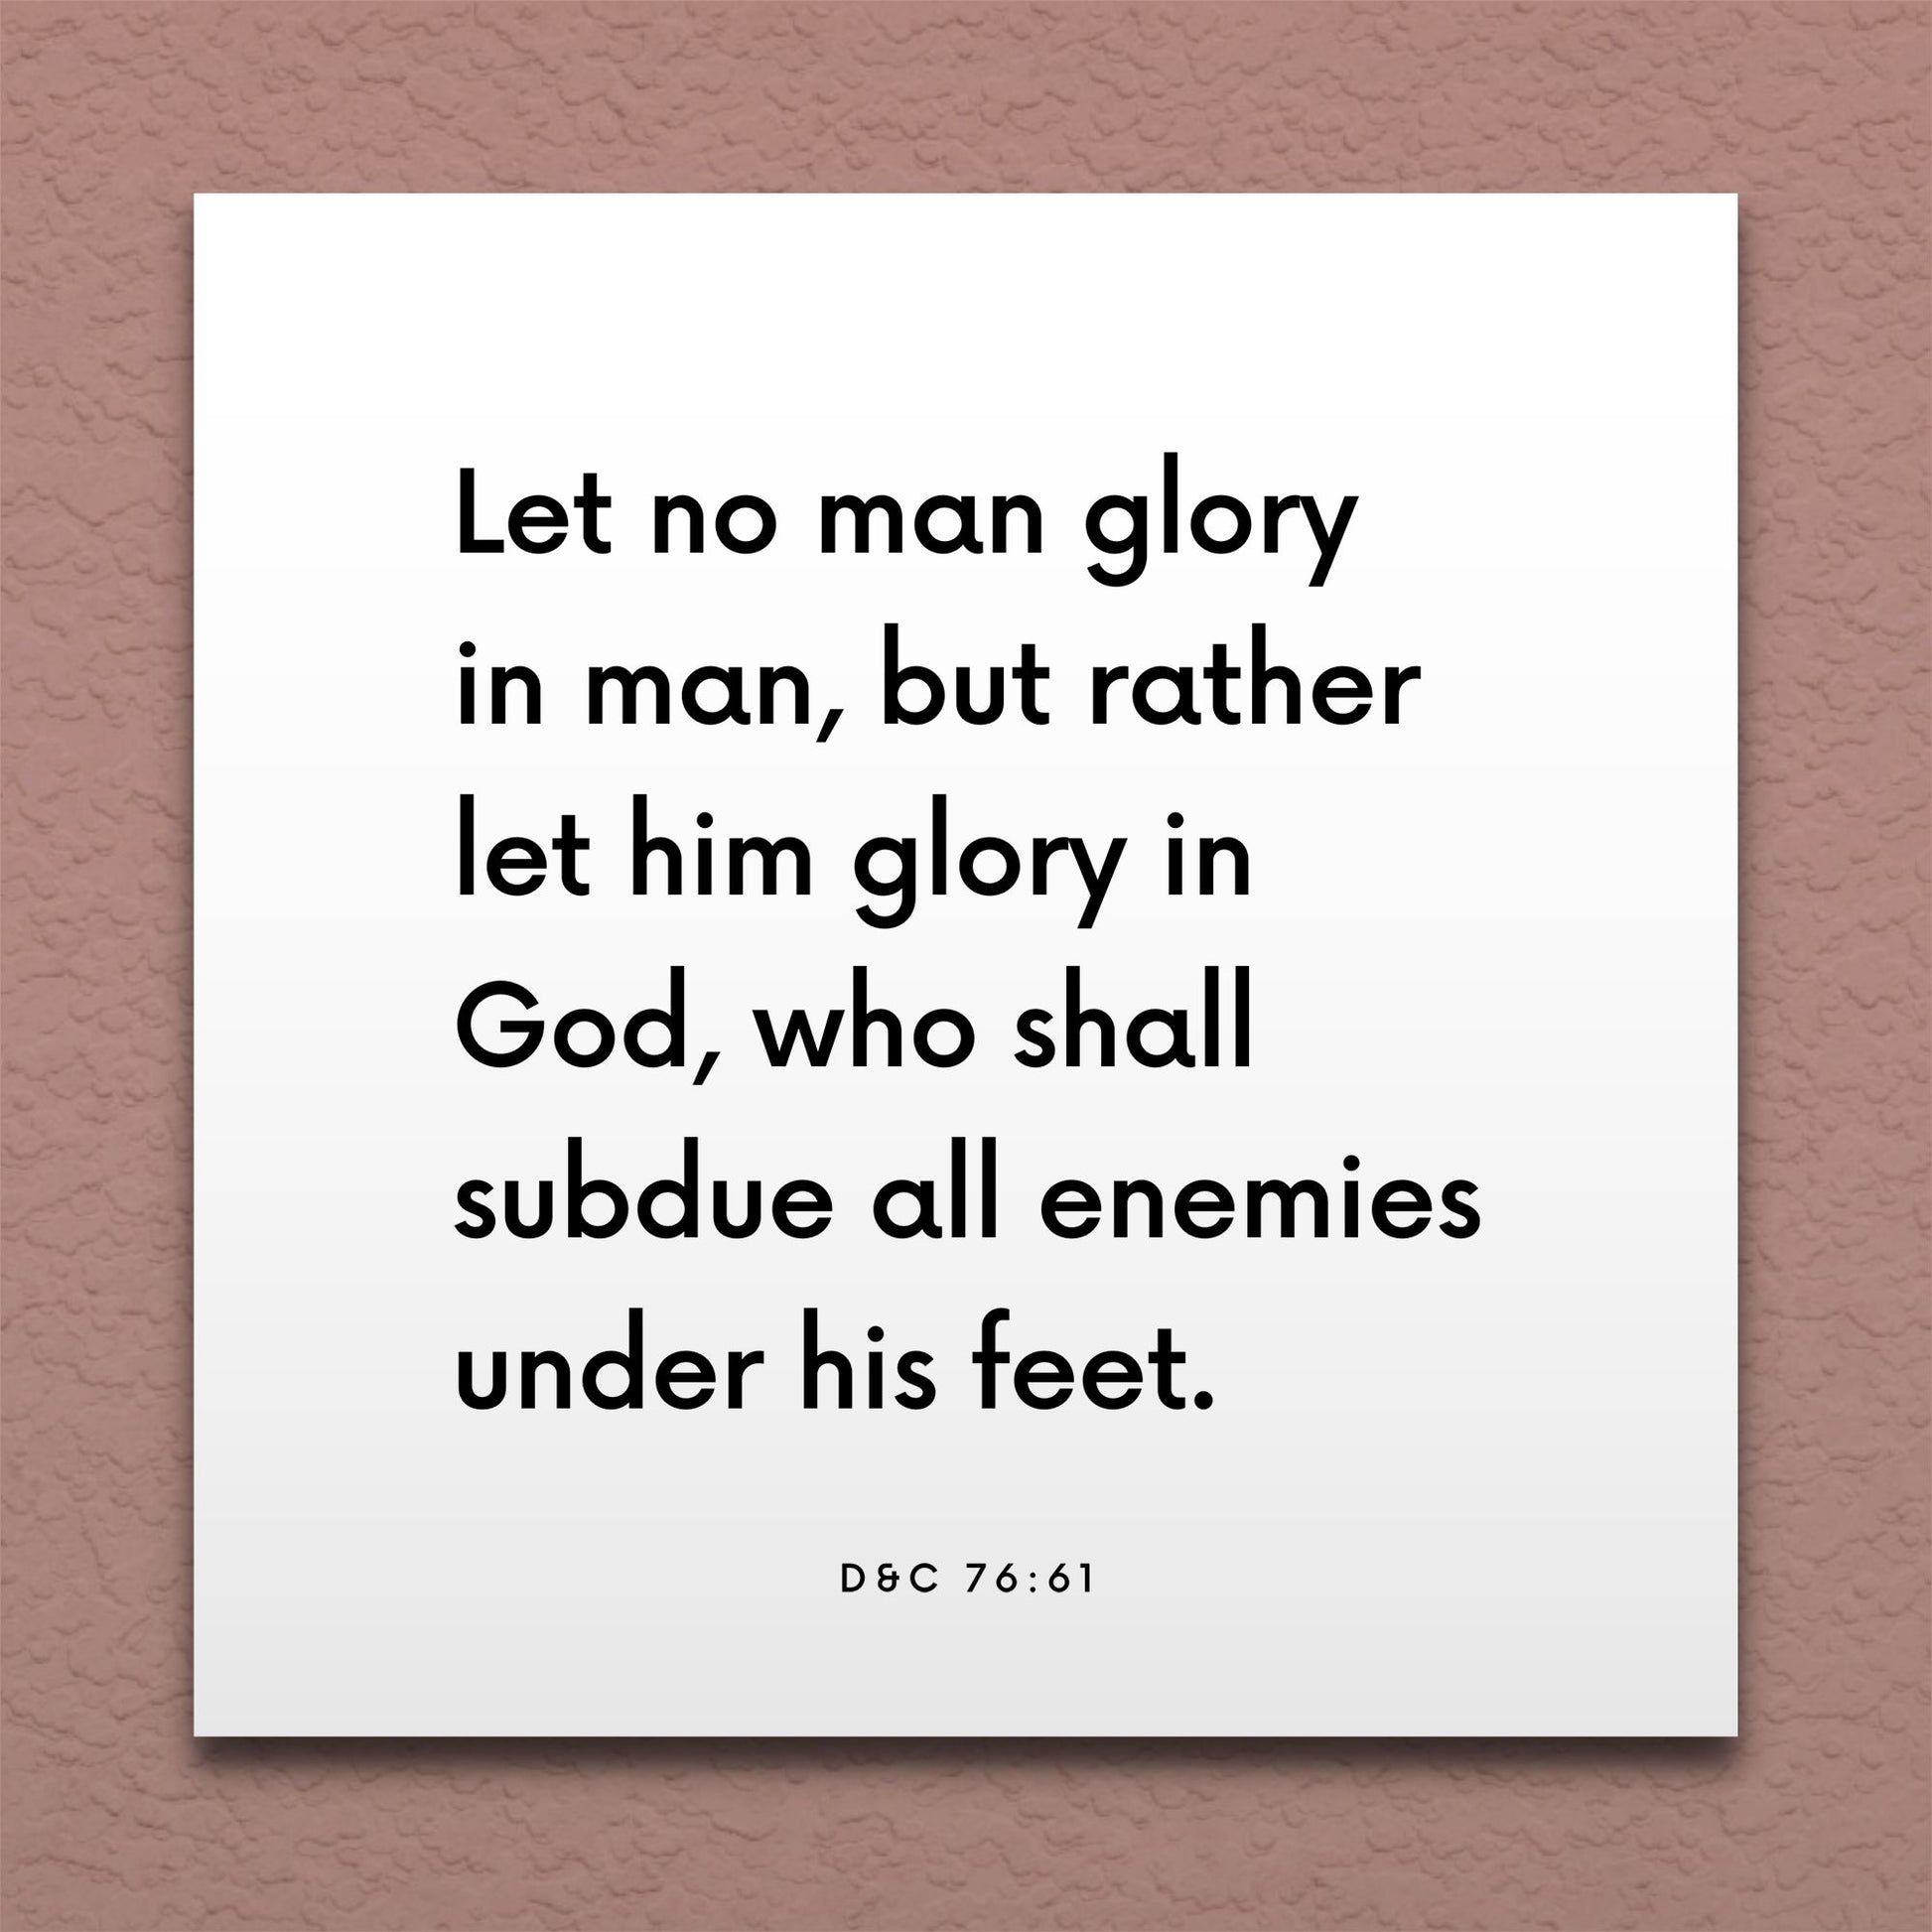 Wall-mounted scripture tile for D&C 76:61 - "Let no man glory in man, but rather let him glory in God"